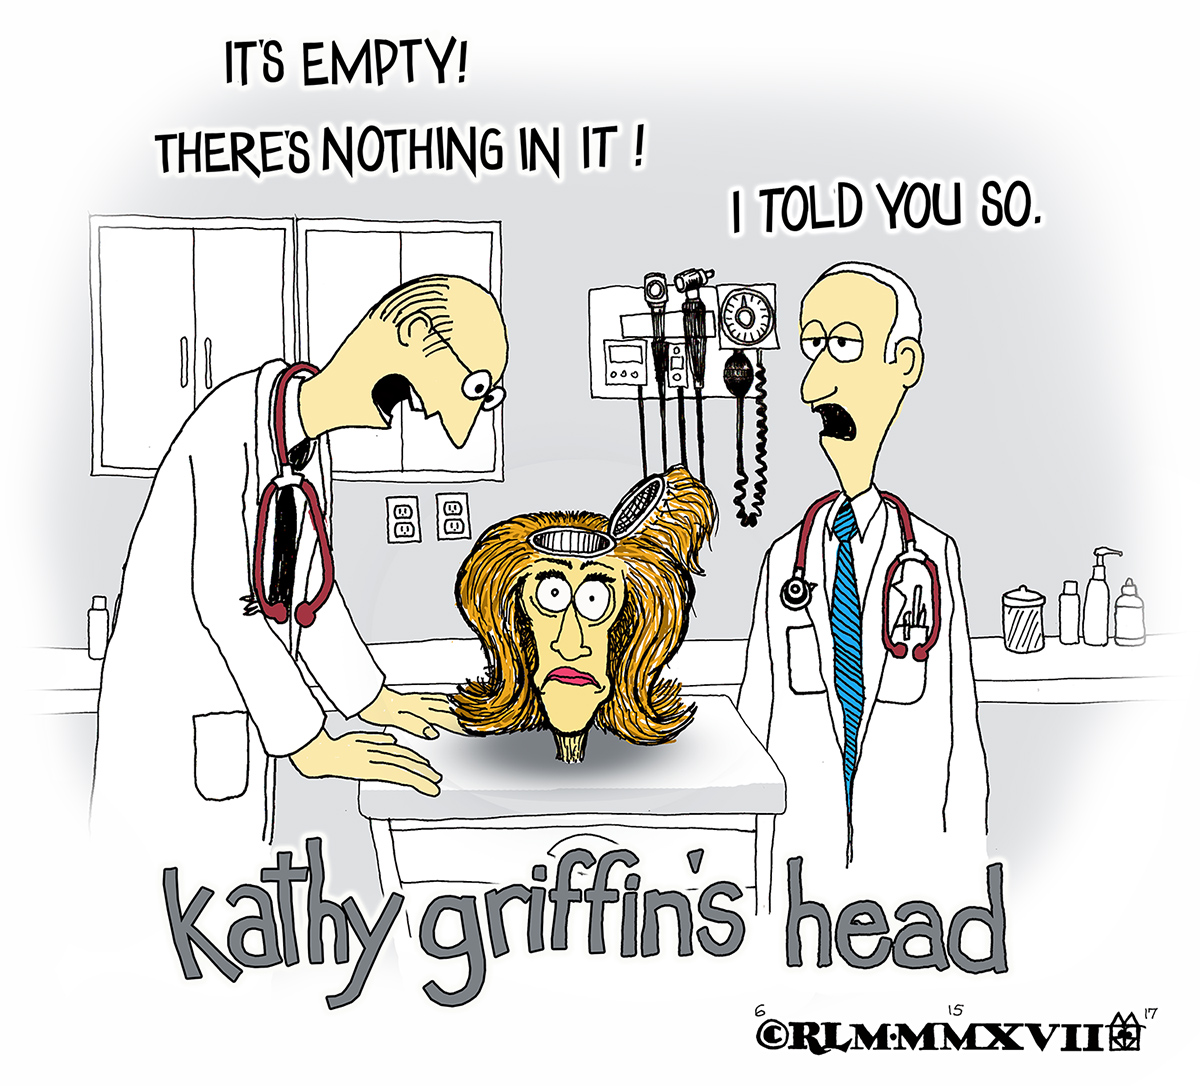 KATHY GRIFFIN'S HEAD